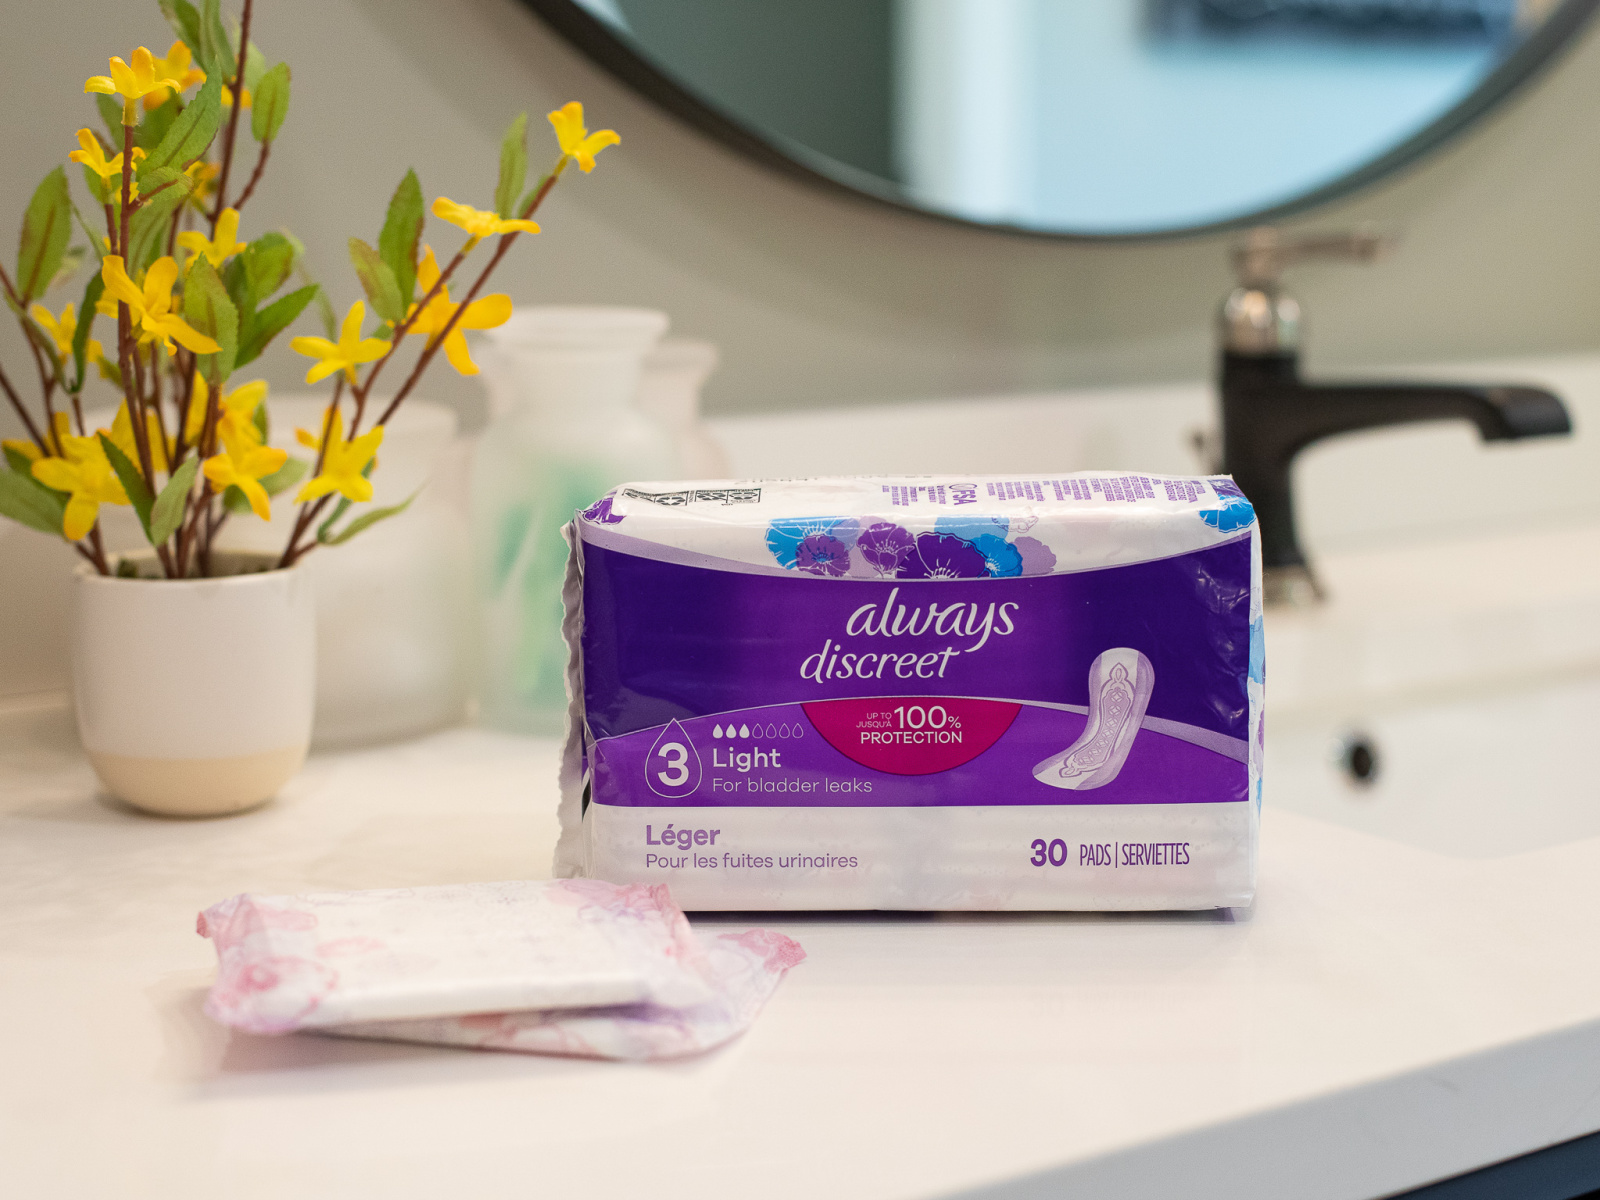 Always Discreet Pads As Low As 99¢ At Publix